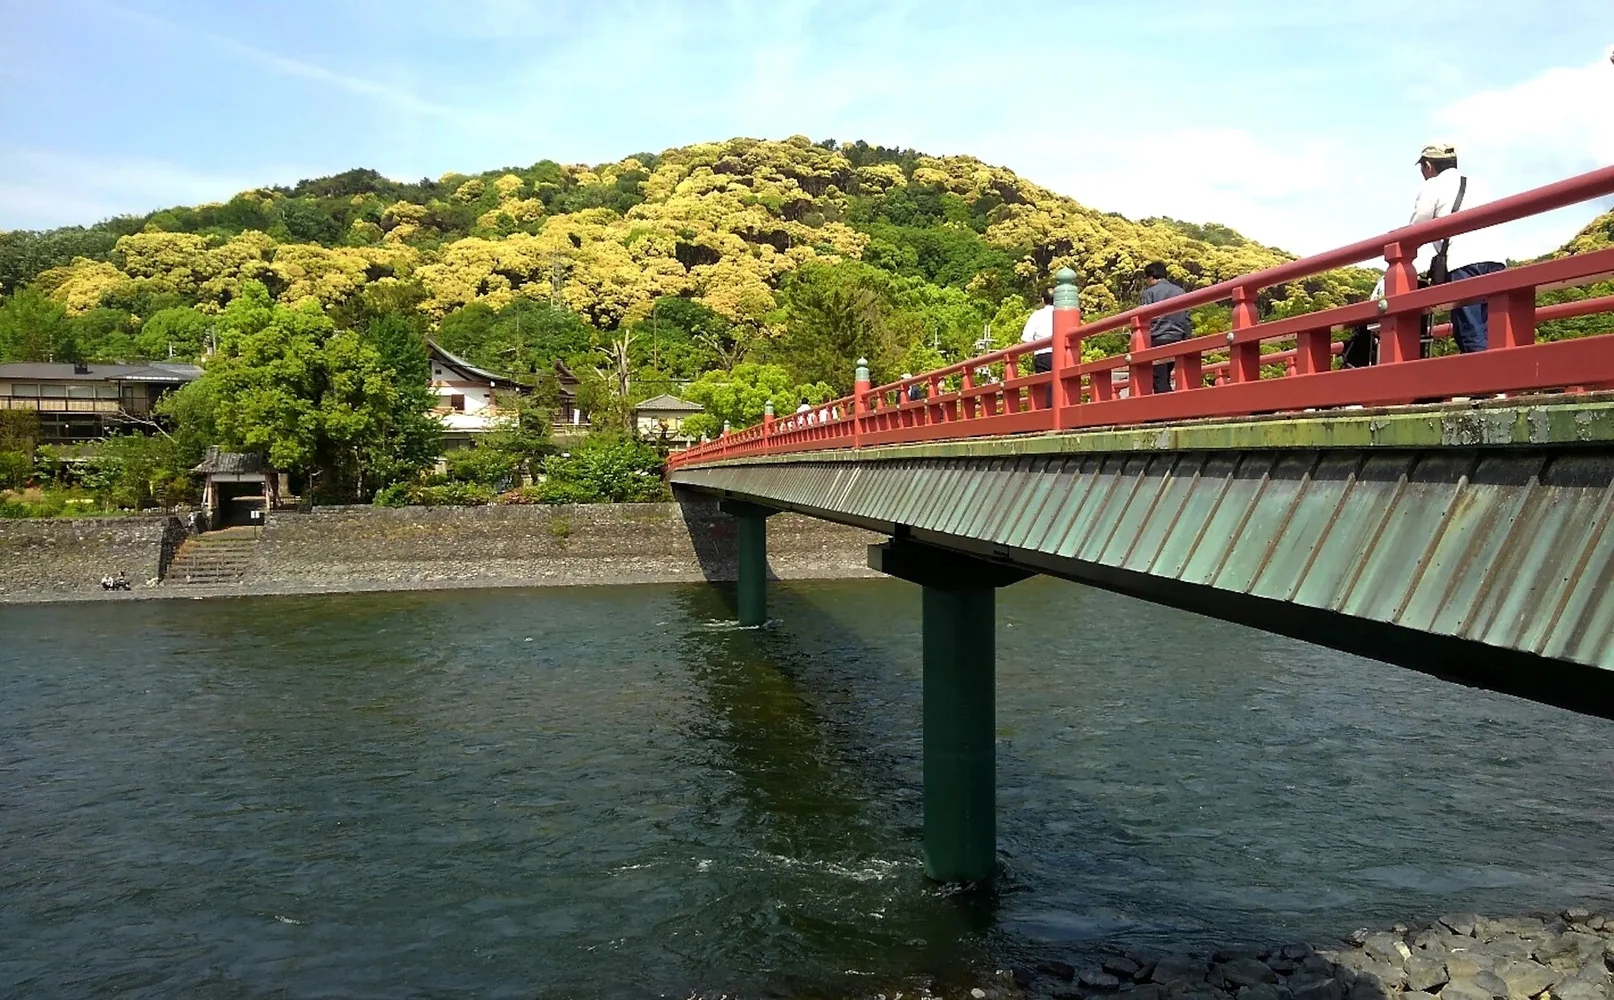 Book a Matcha Tour in Uji, the Home of Green Tea in Kyoto!